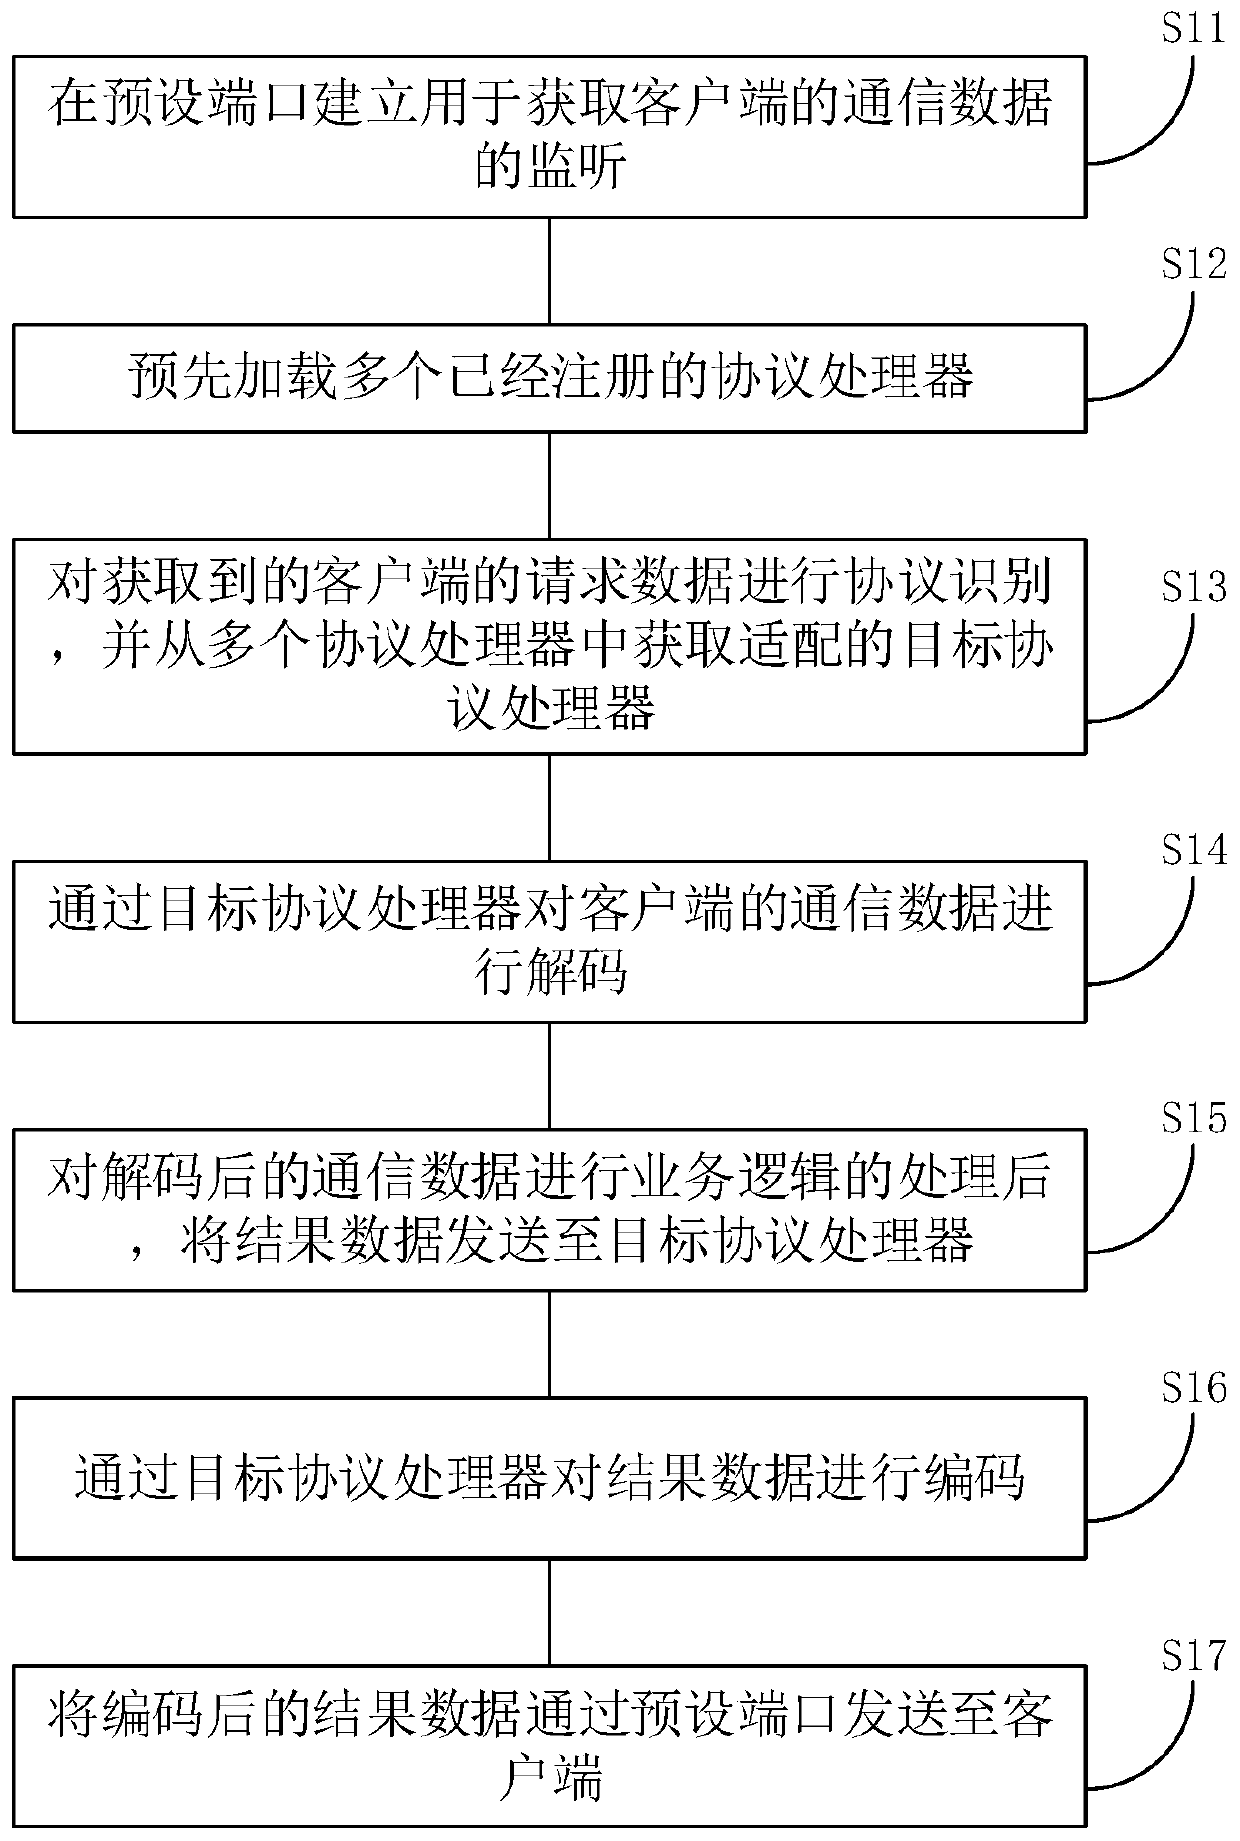 Memory, communication channel multiplexing implementation method, device and equipment